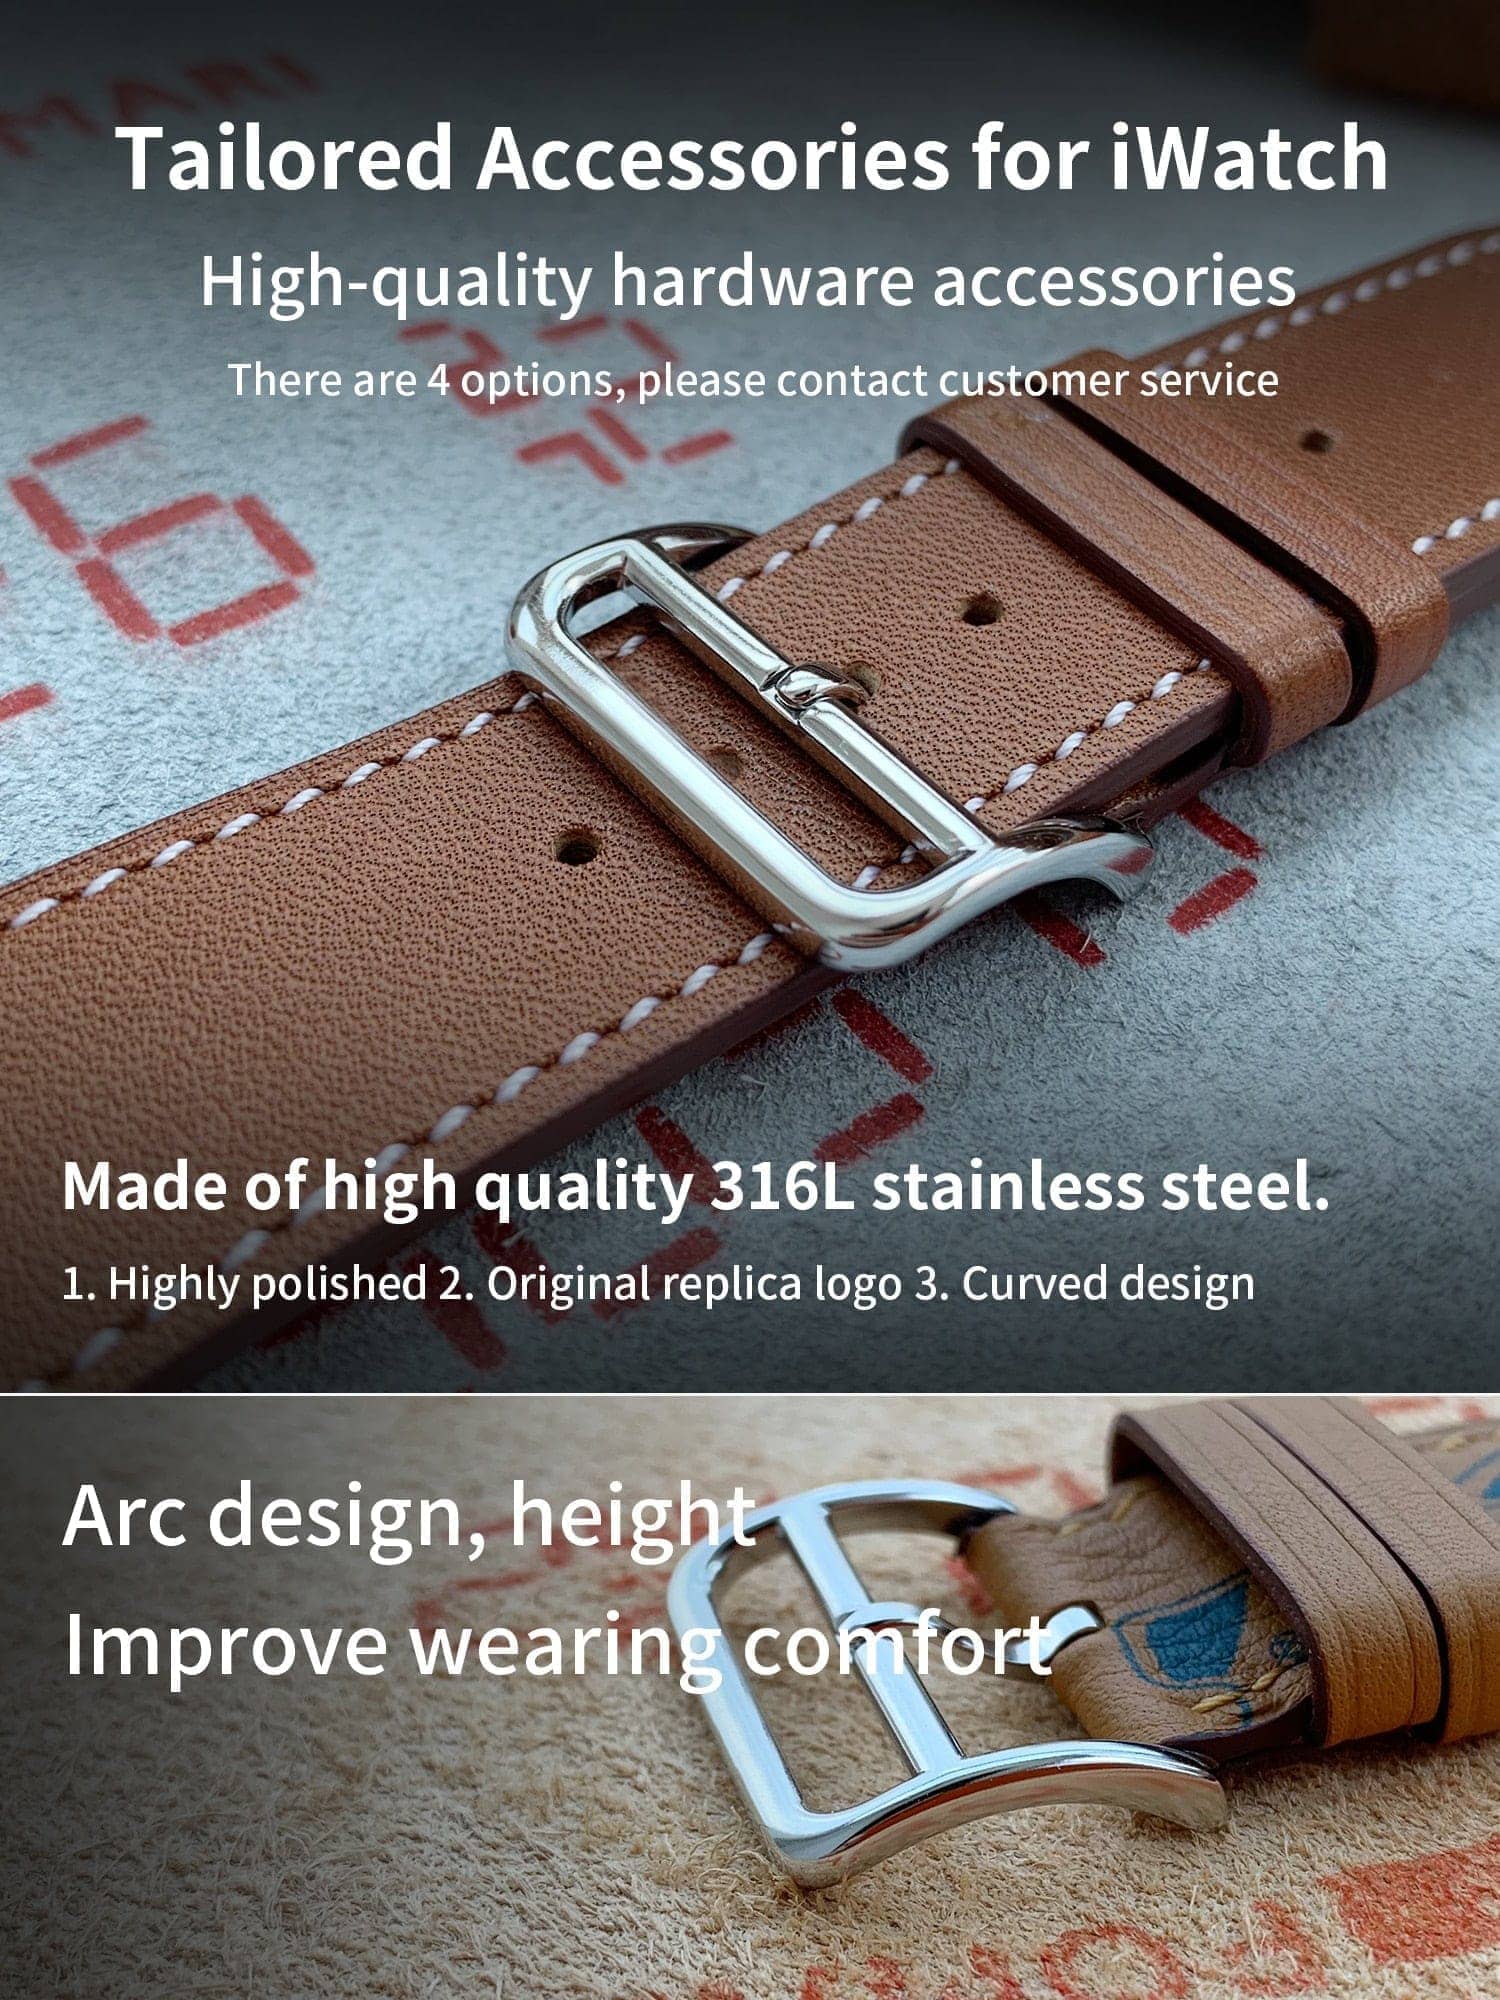 Hermes Style Watch Bands for Apple Watches